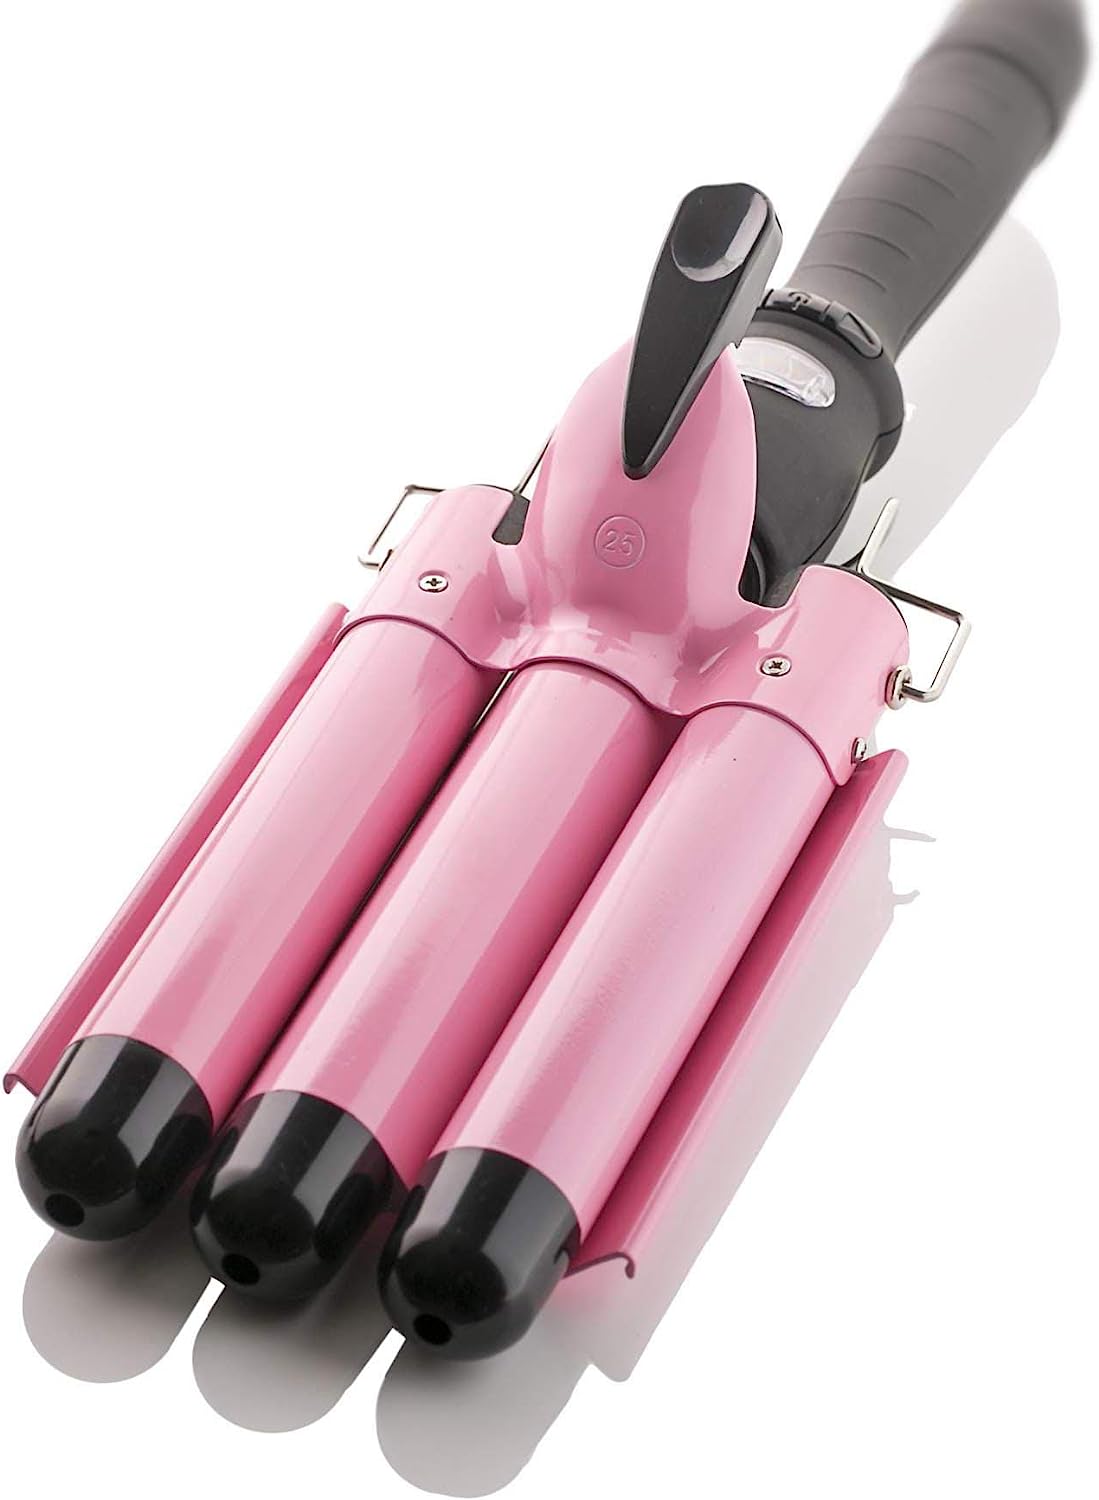 Alure Three Barrel Curling Iron Wand with LCD [...]